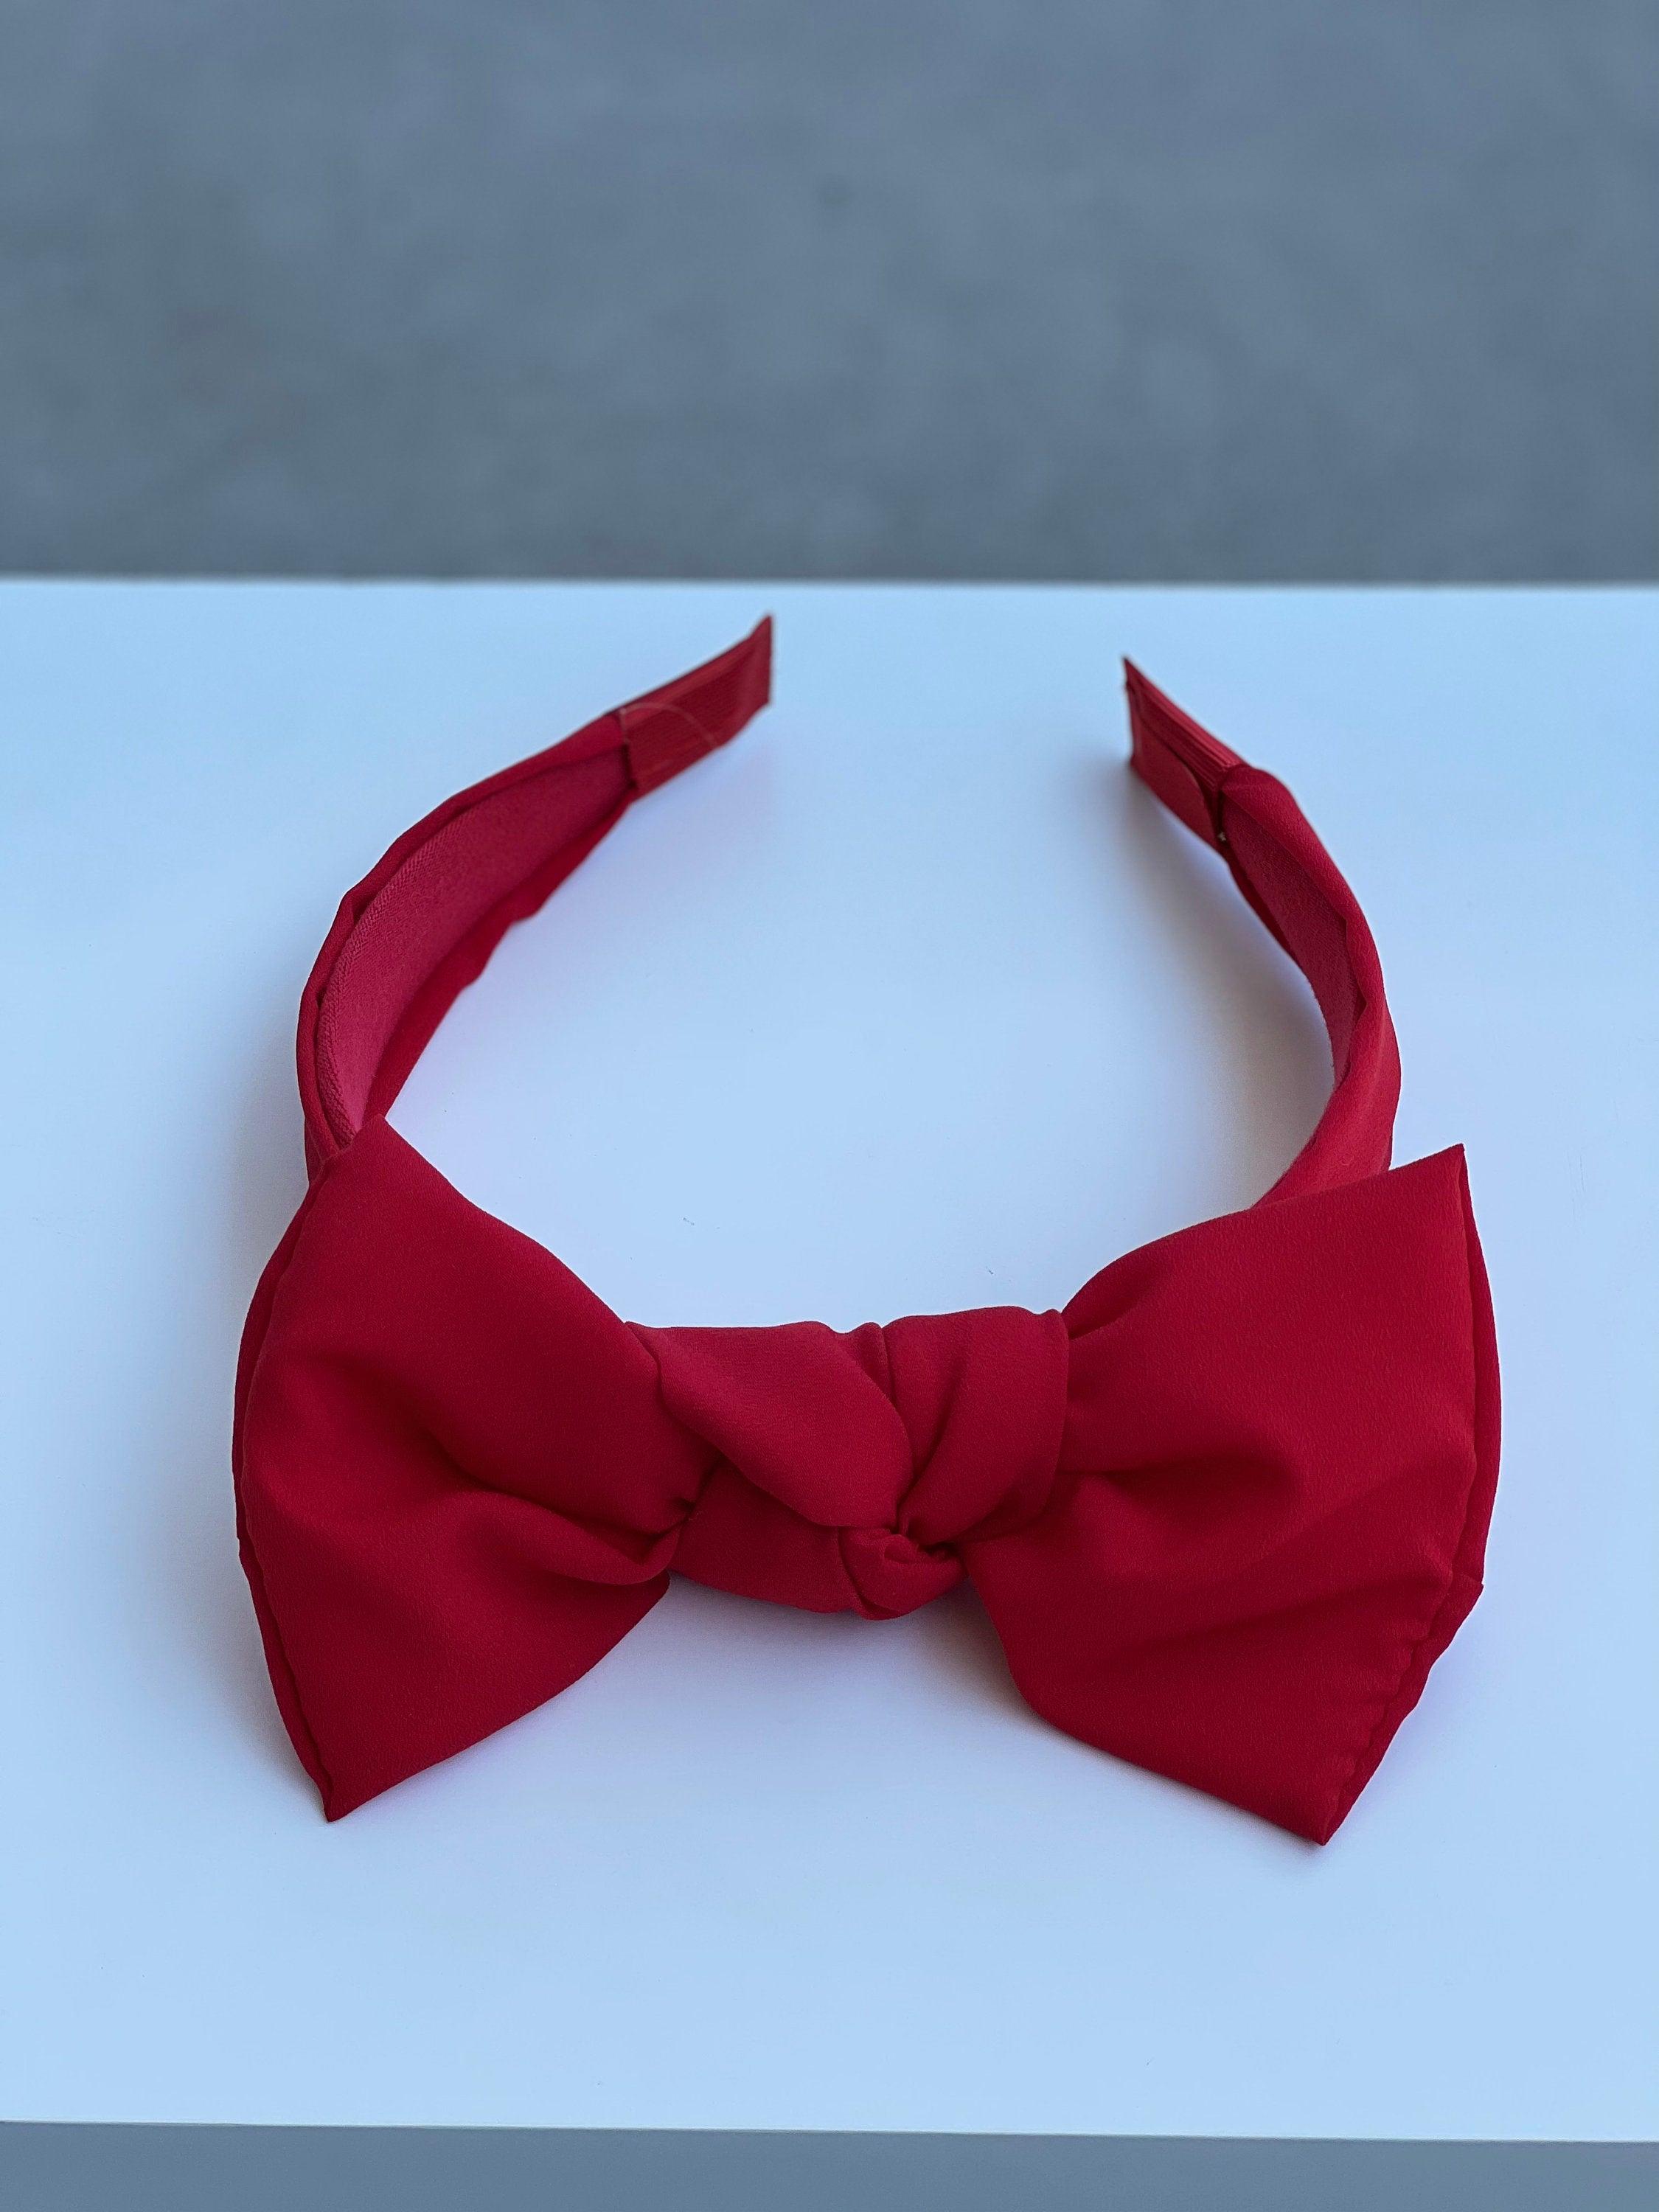 Beautiful Red Viscose Crepe Bow Headband for Women - Classic Thin Hair Band with Comfortable Fit and Stylish Red Bow Tie Design available at Moyoni Design